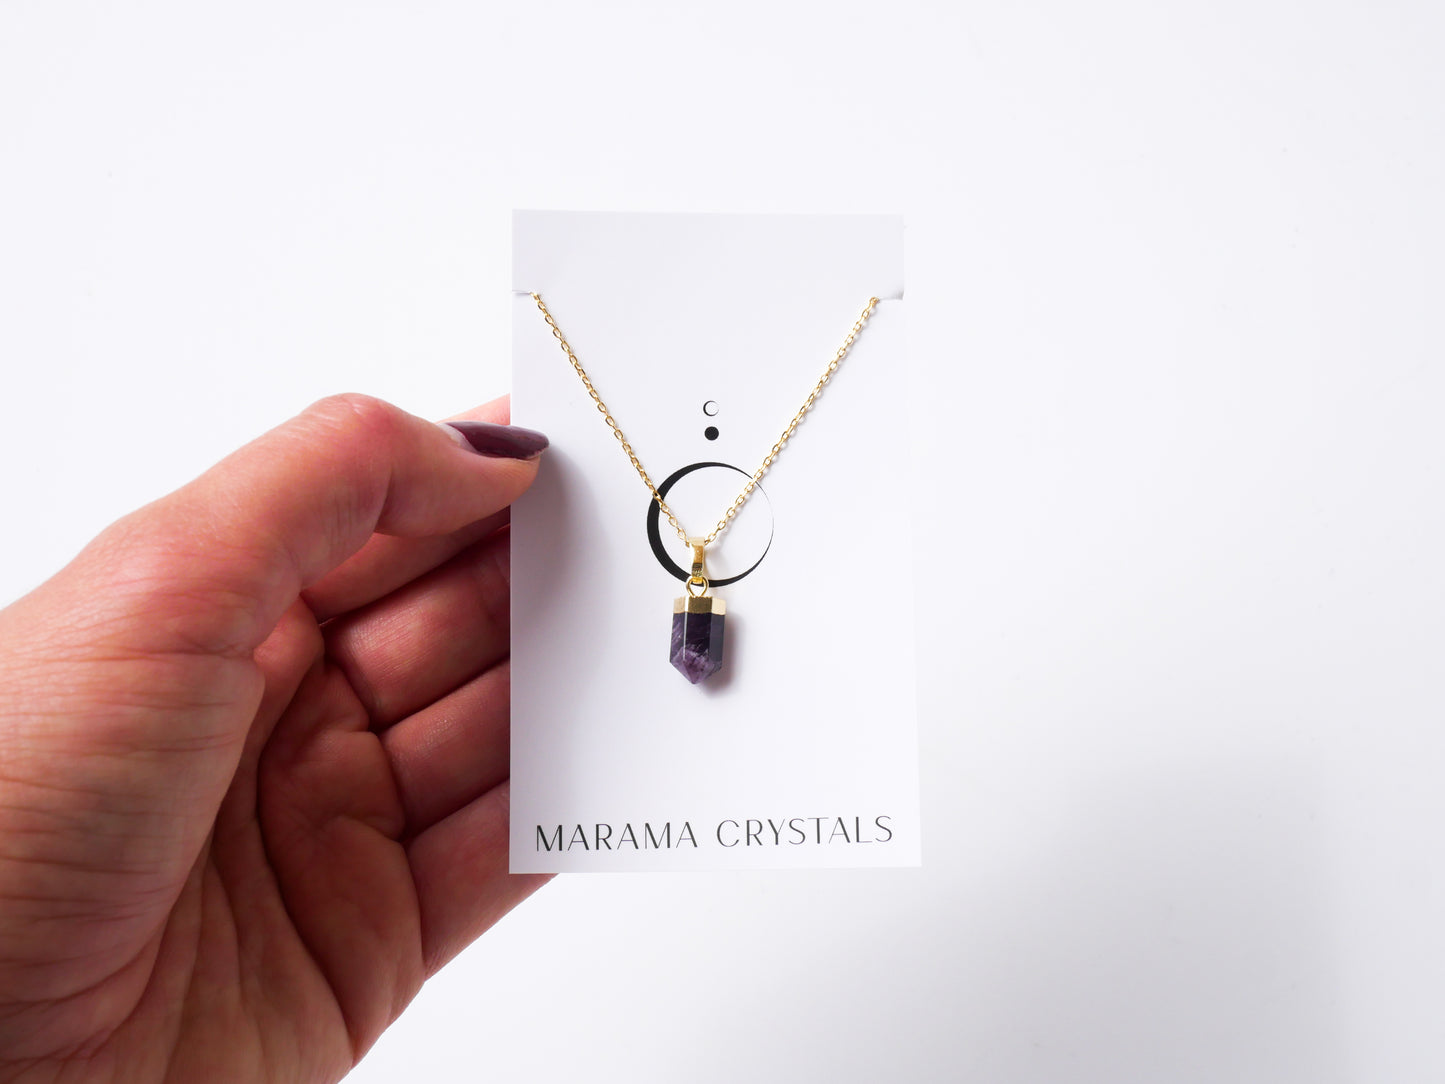 Amethyst Petite Necklace - 18k Gold Plated